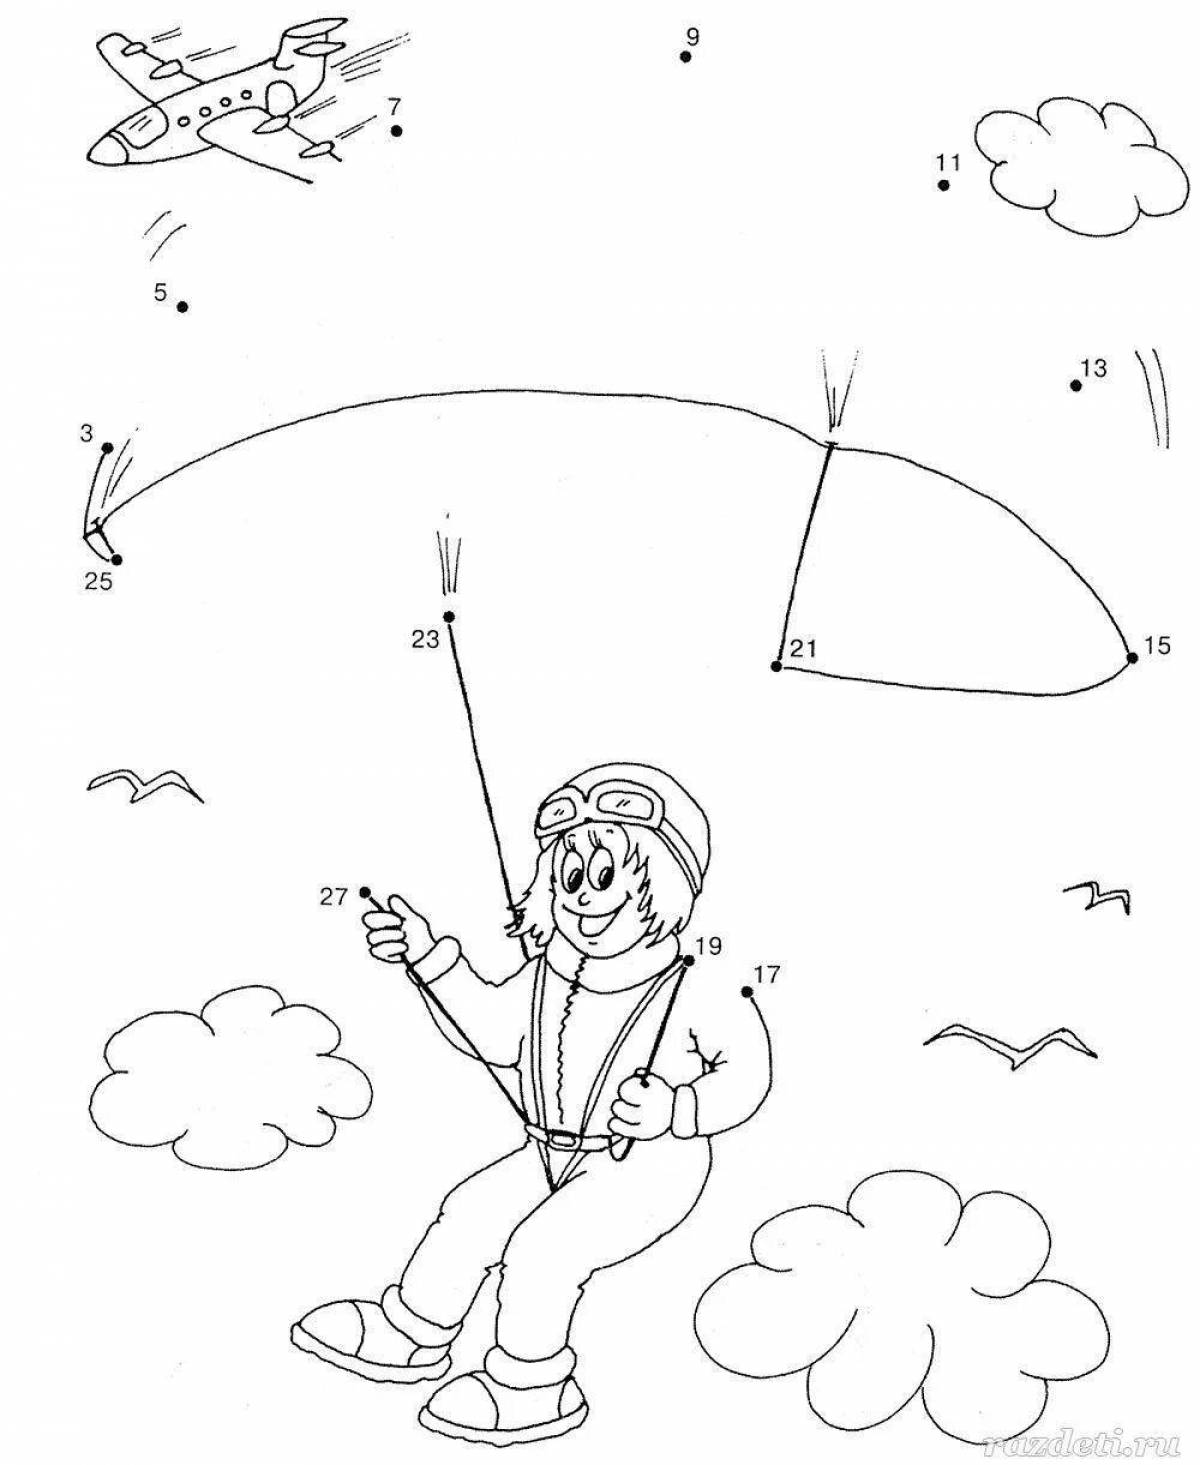 Cute military skydiver coloring book for kids